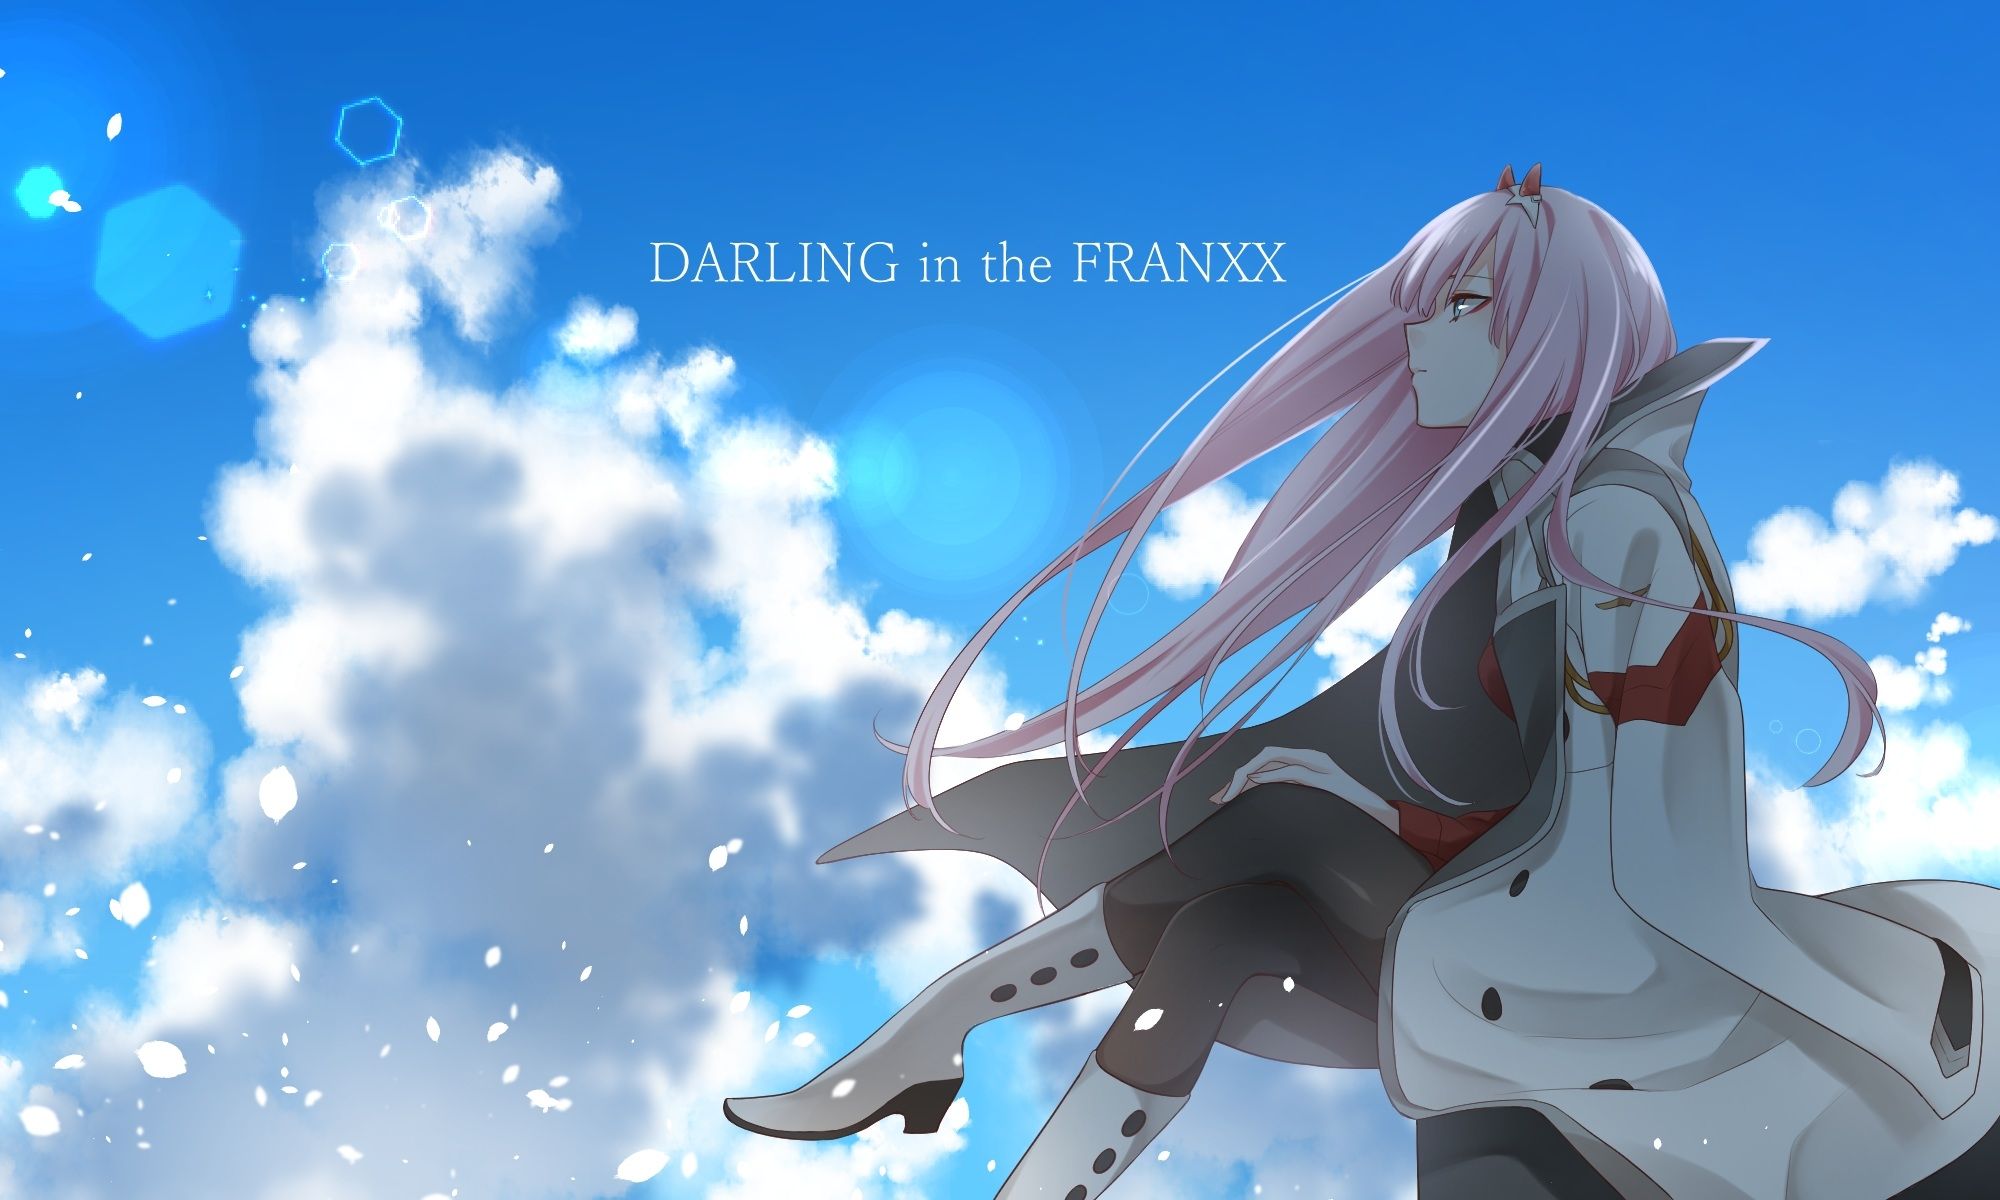 Download 2000x1200 Darling In The Franxx, Zero Two, Pink Hair, Clouds, Profile View, Coat Wallpaper